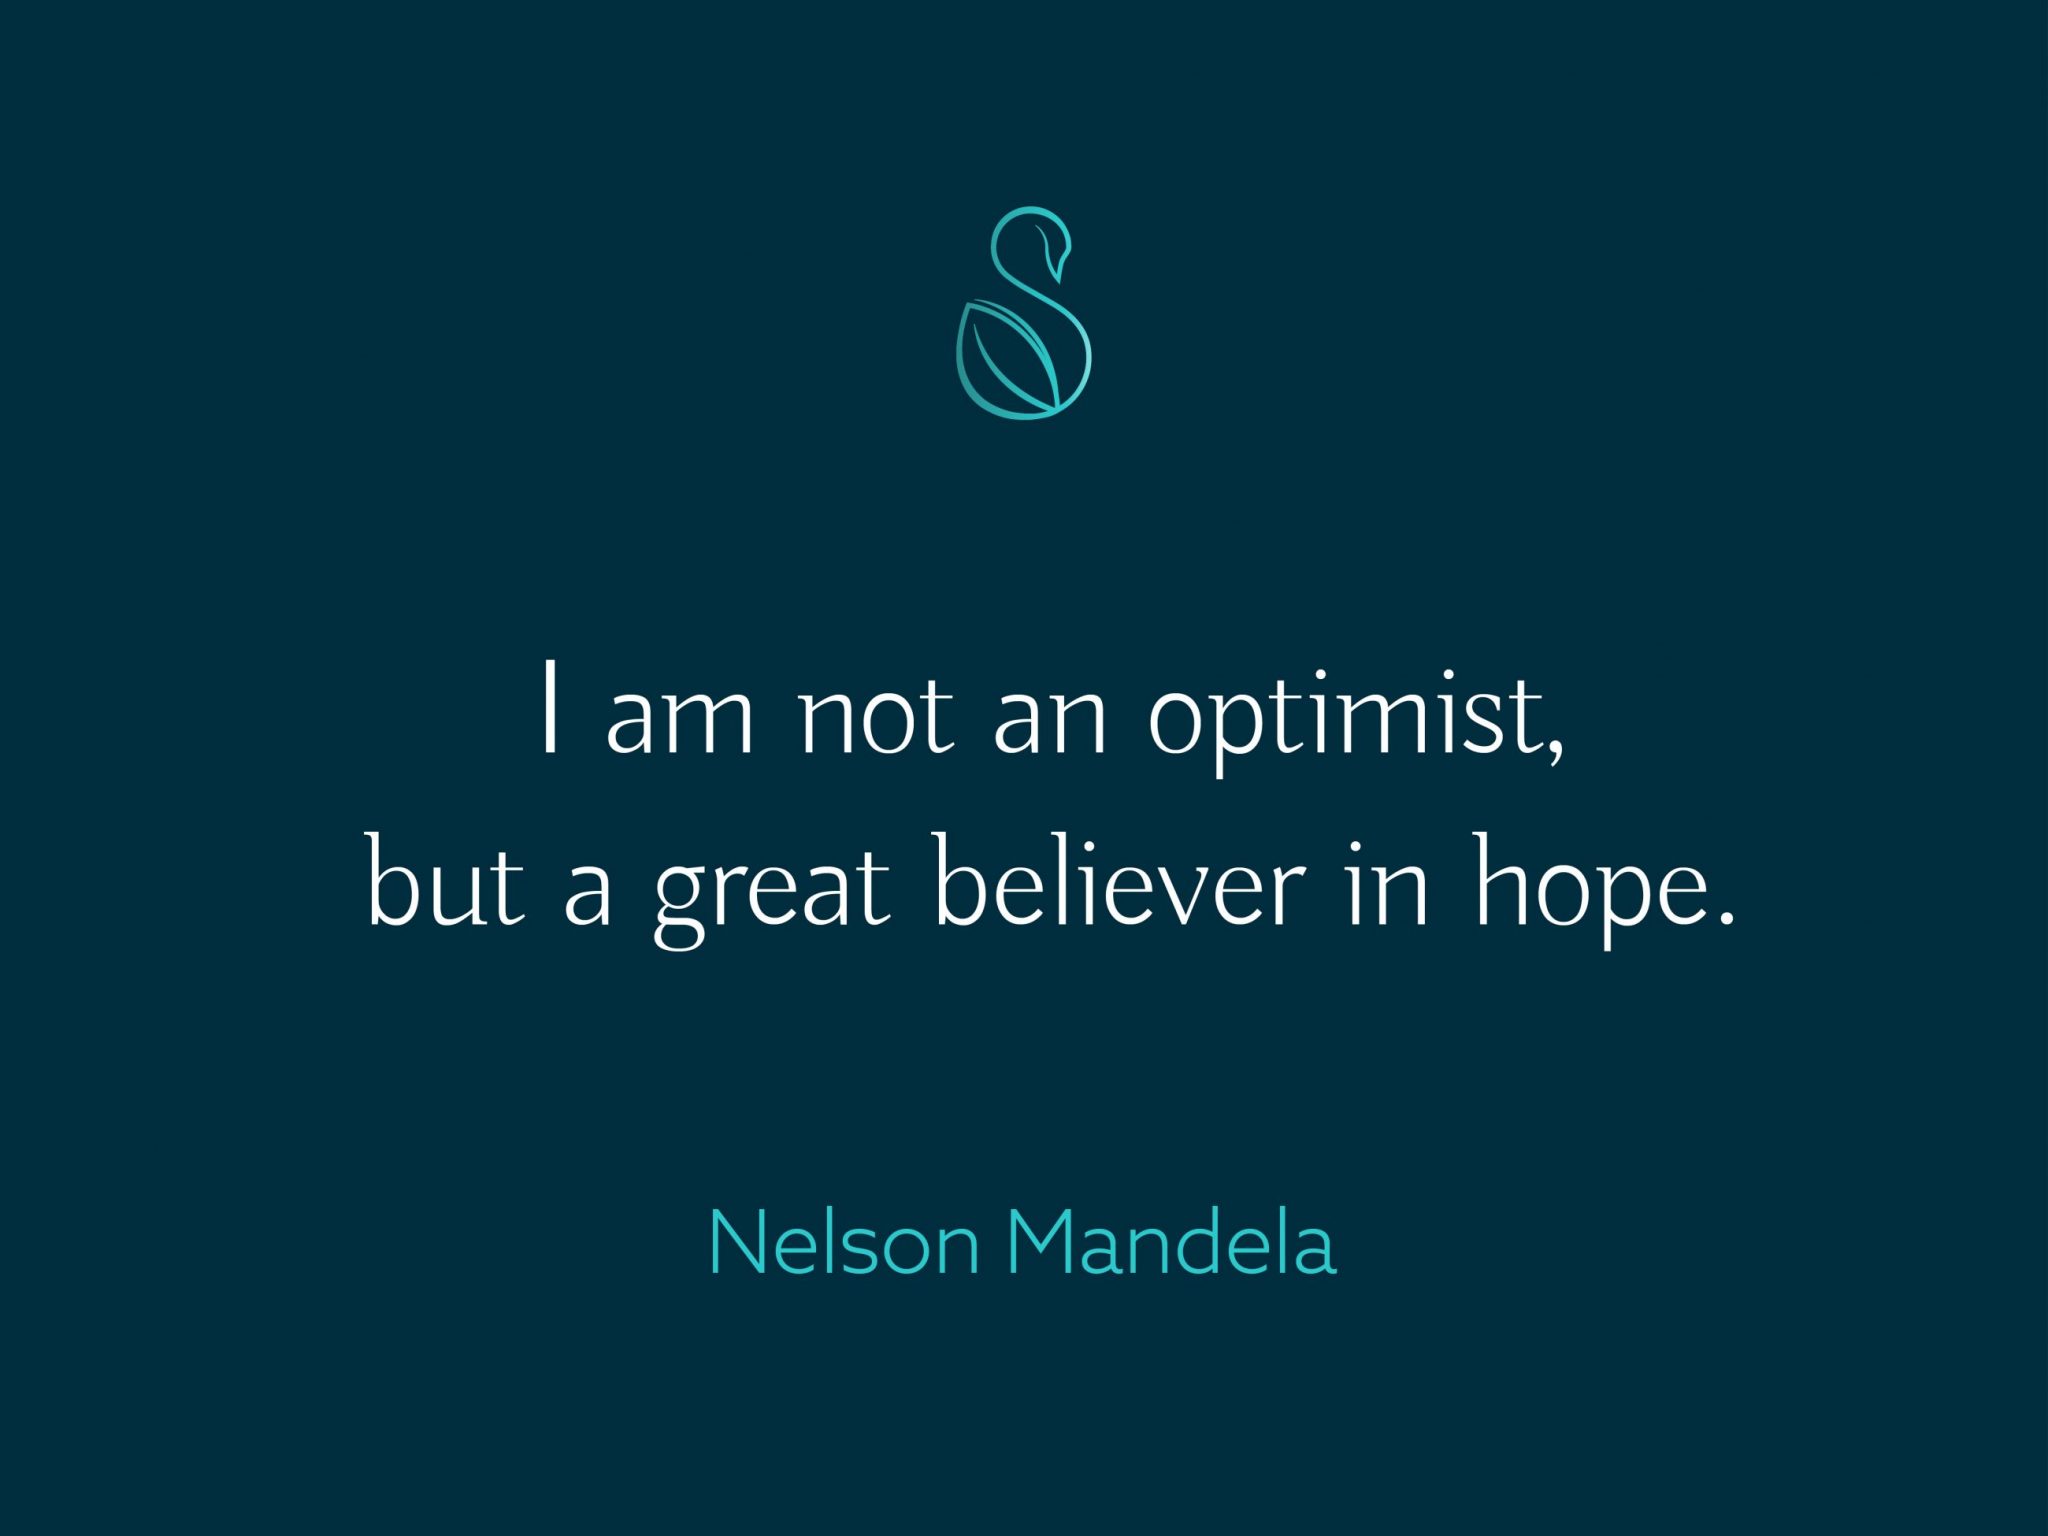 Quote about grief and hope from past President of South Africa Nelson Mandela